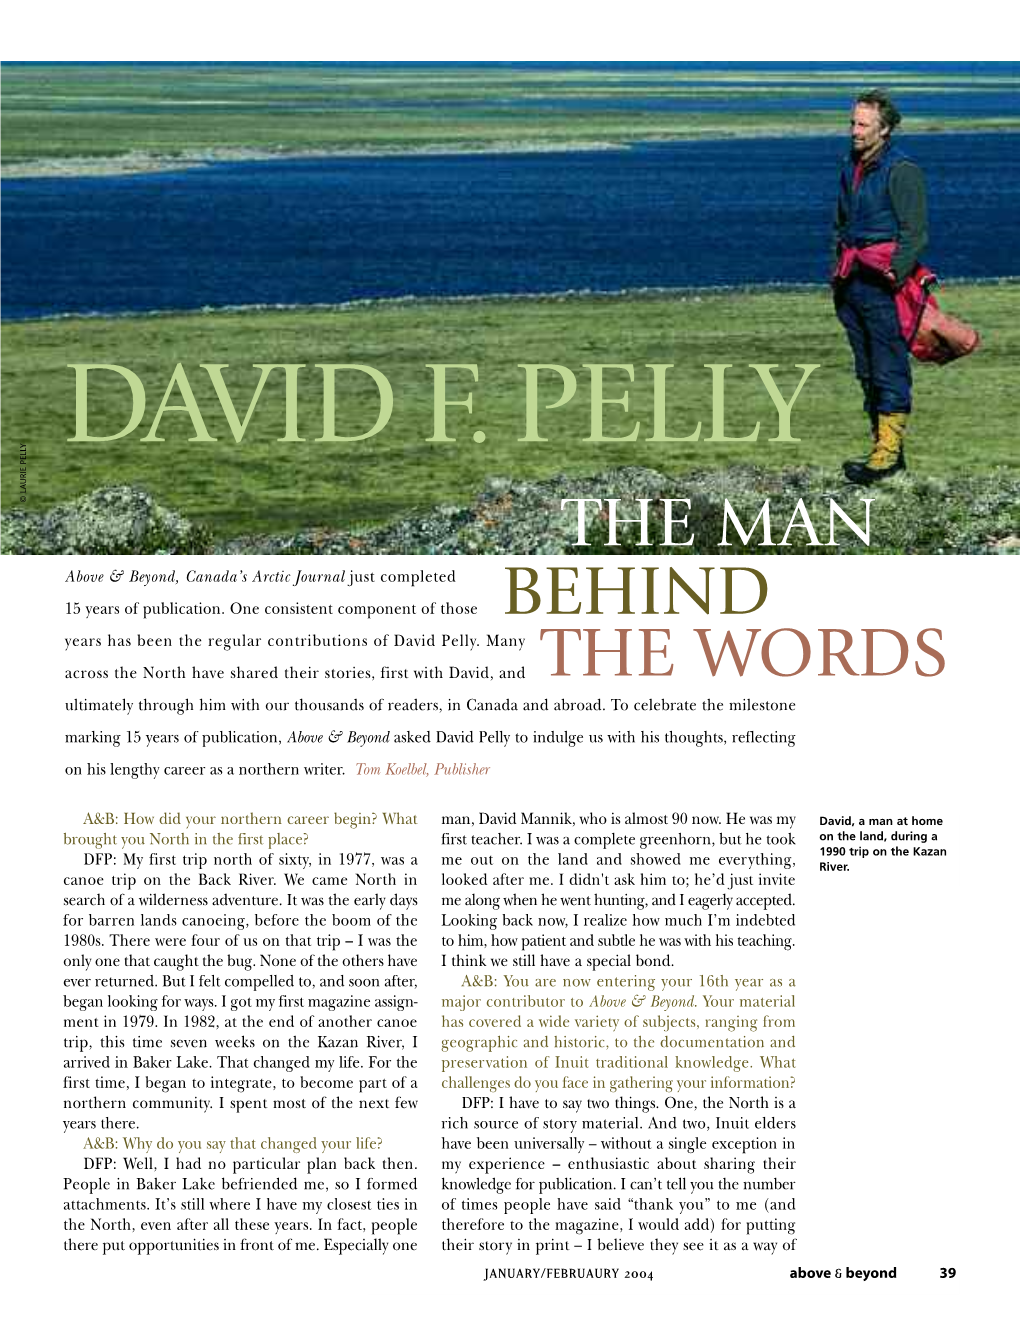 David Pelly – the Man Behind the Words